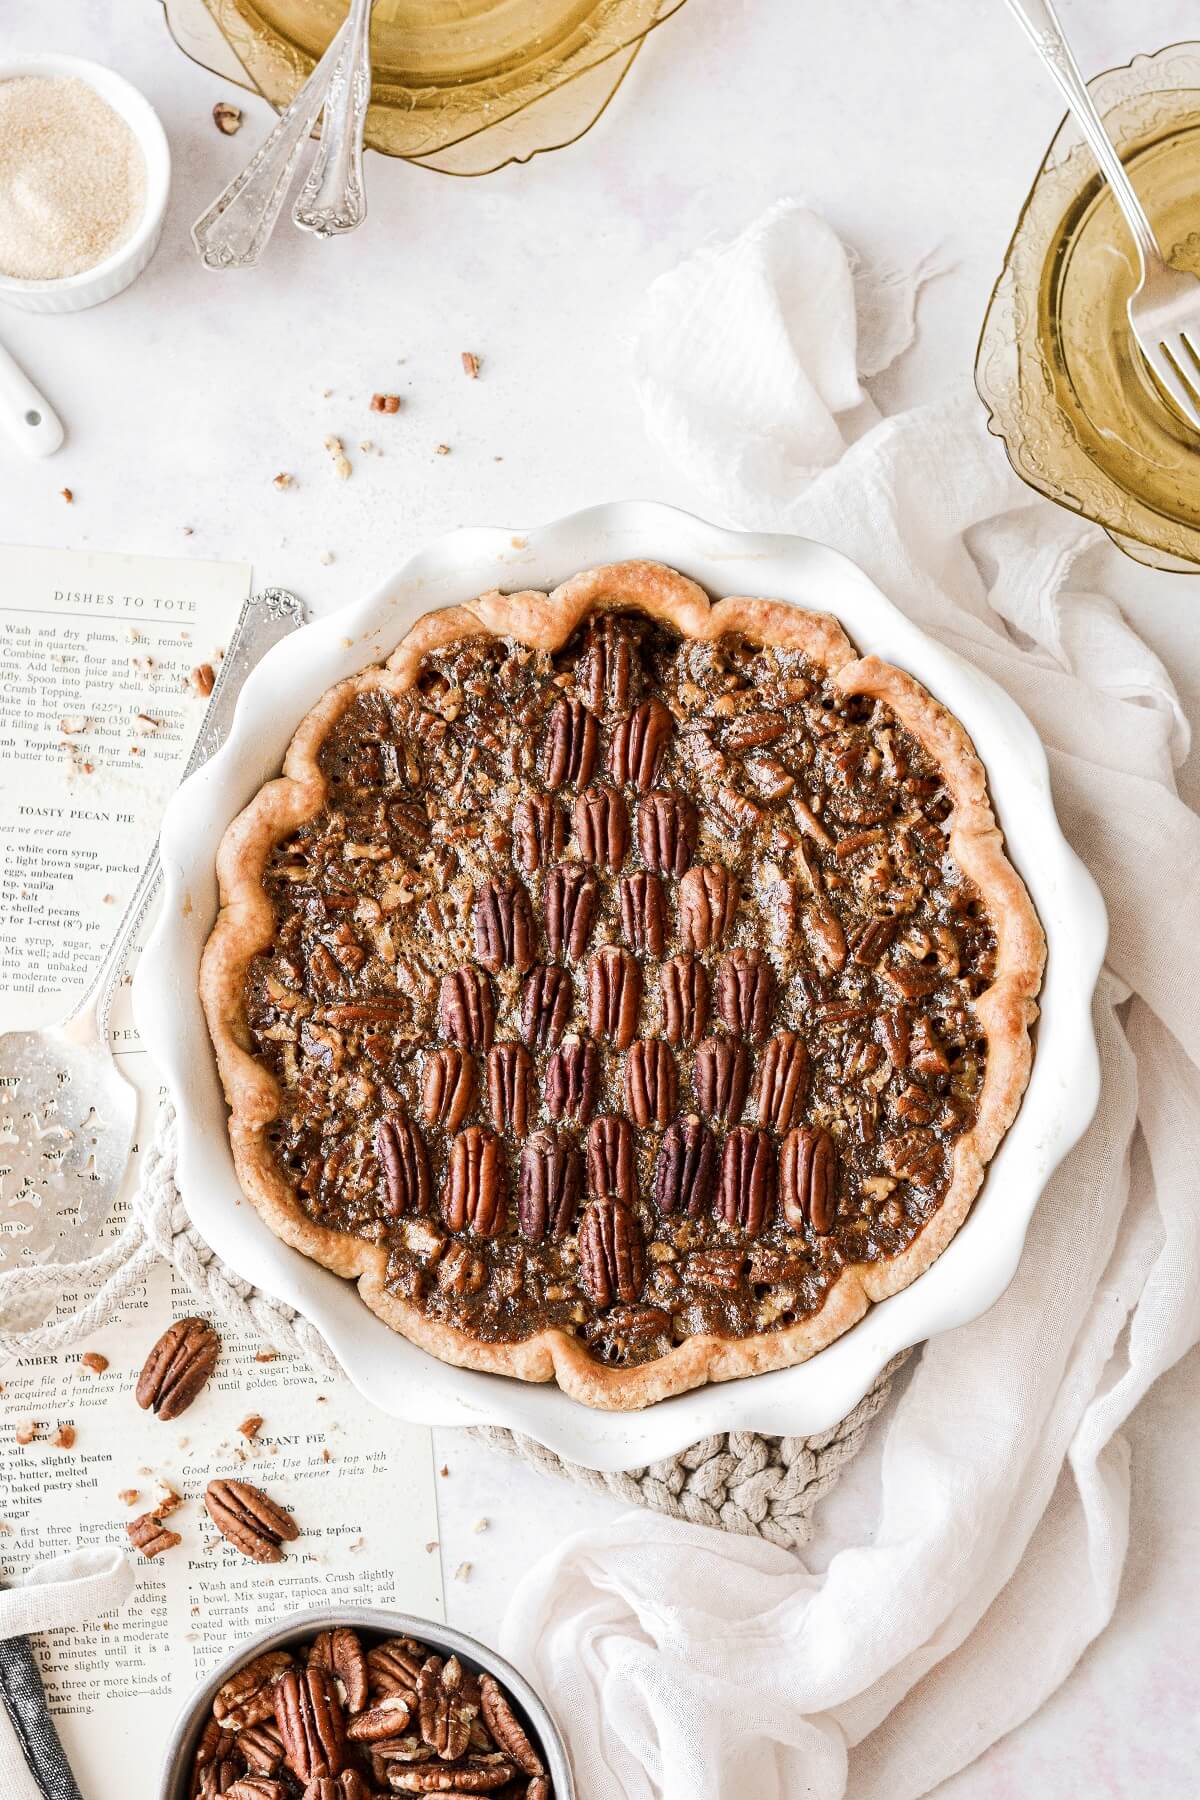 A pecan pie with pecans arranged like a Christmas tree on top of the pie.